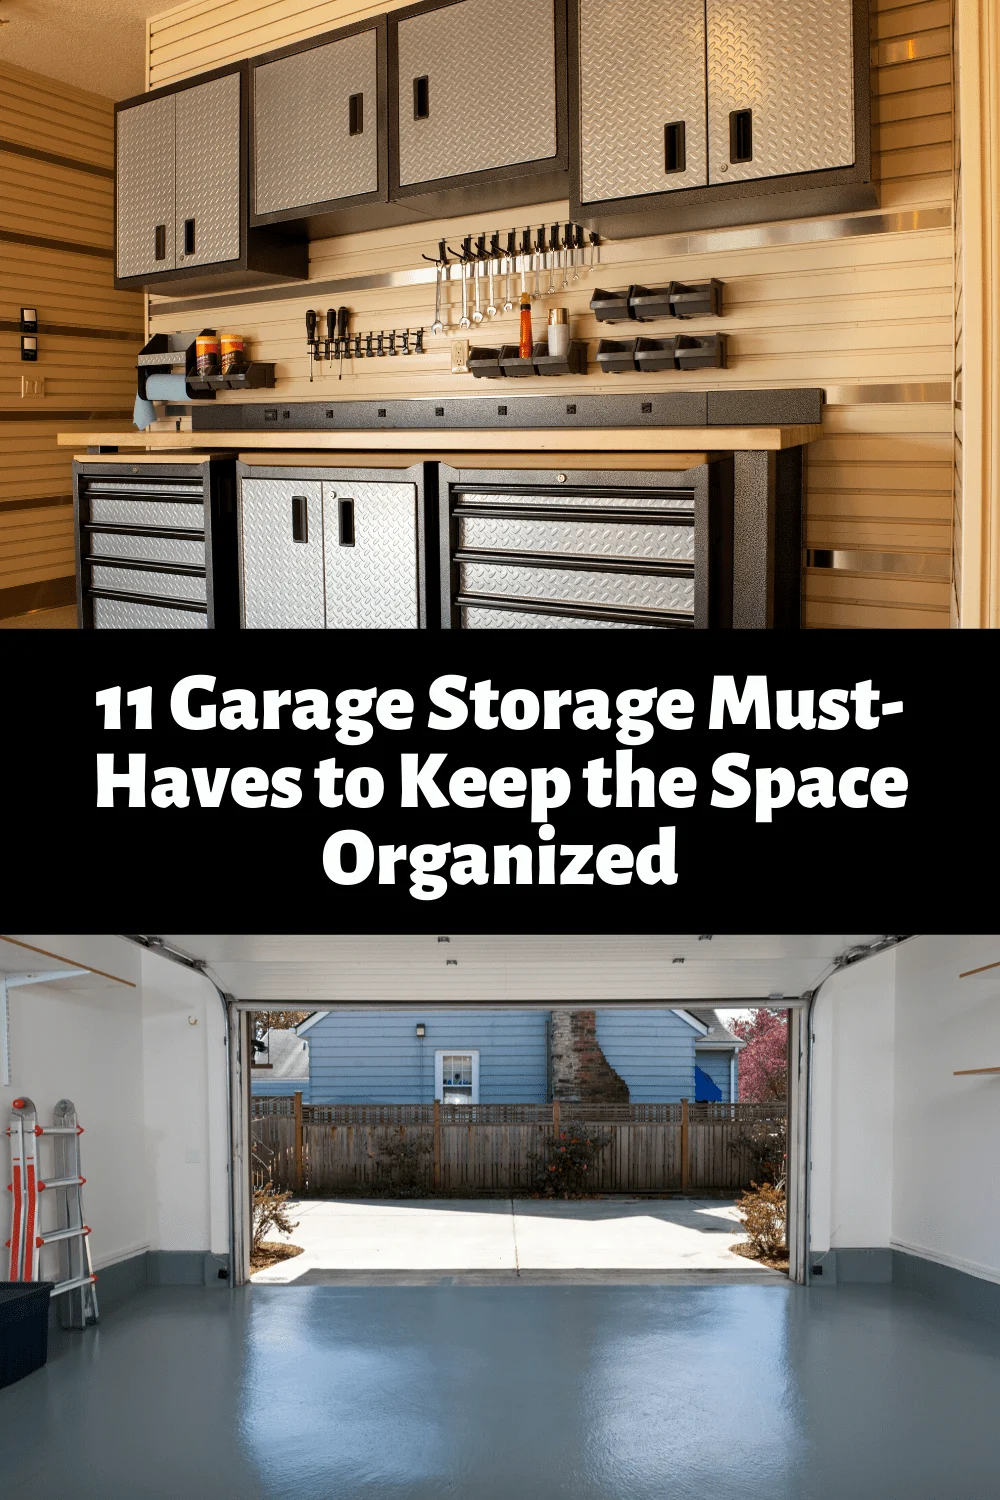 https://www.myturnforus.com/wp-content/uploads/2020/01/10-Garage-Storage-Must-Haves-to-Keep-the-Space-Organized.png.webp